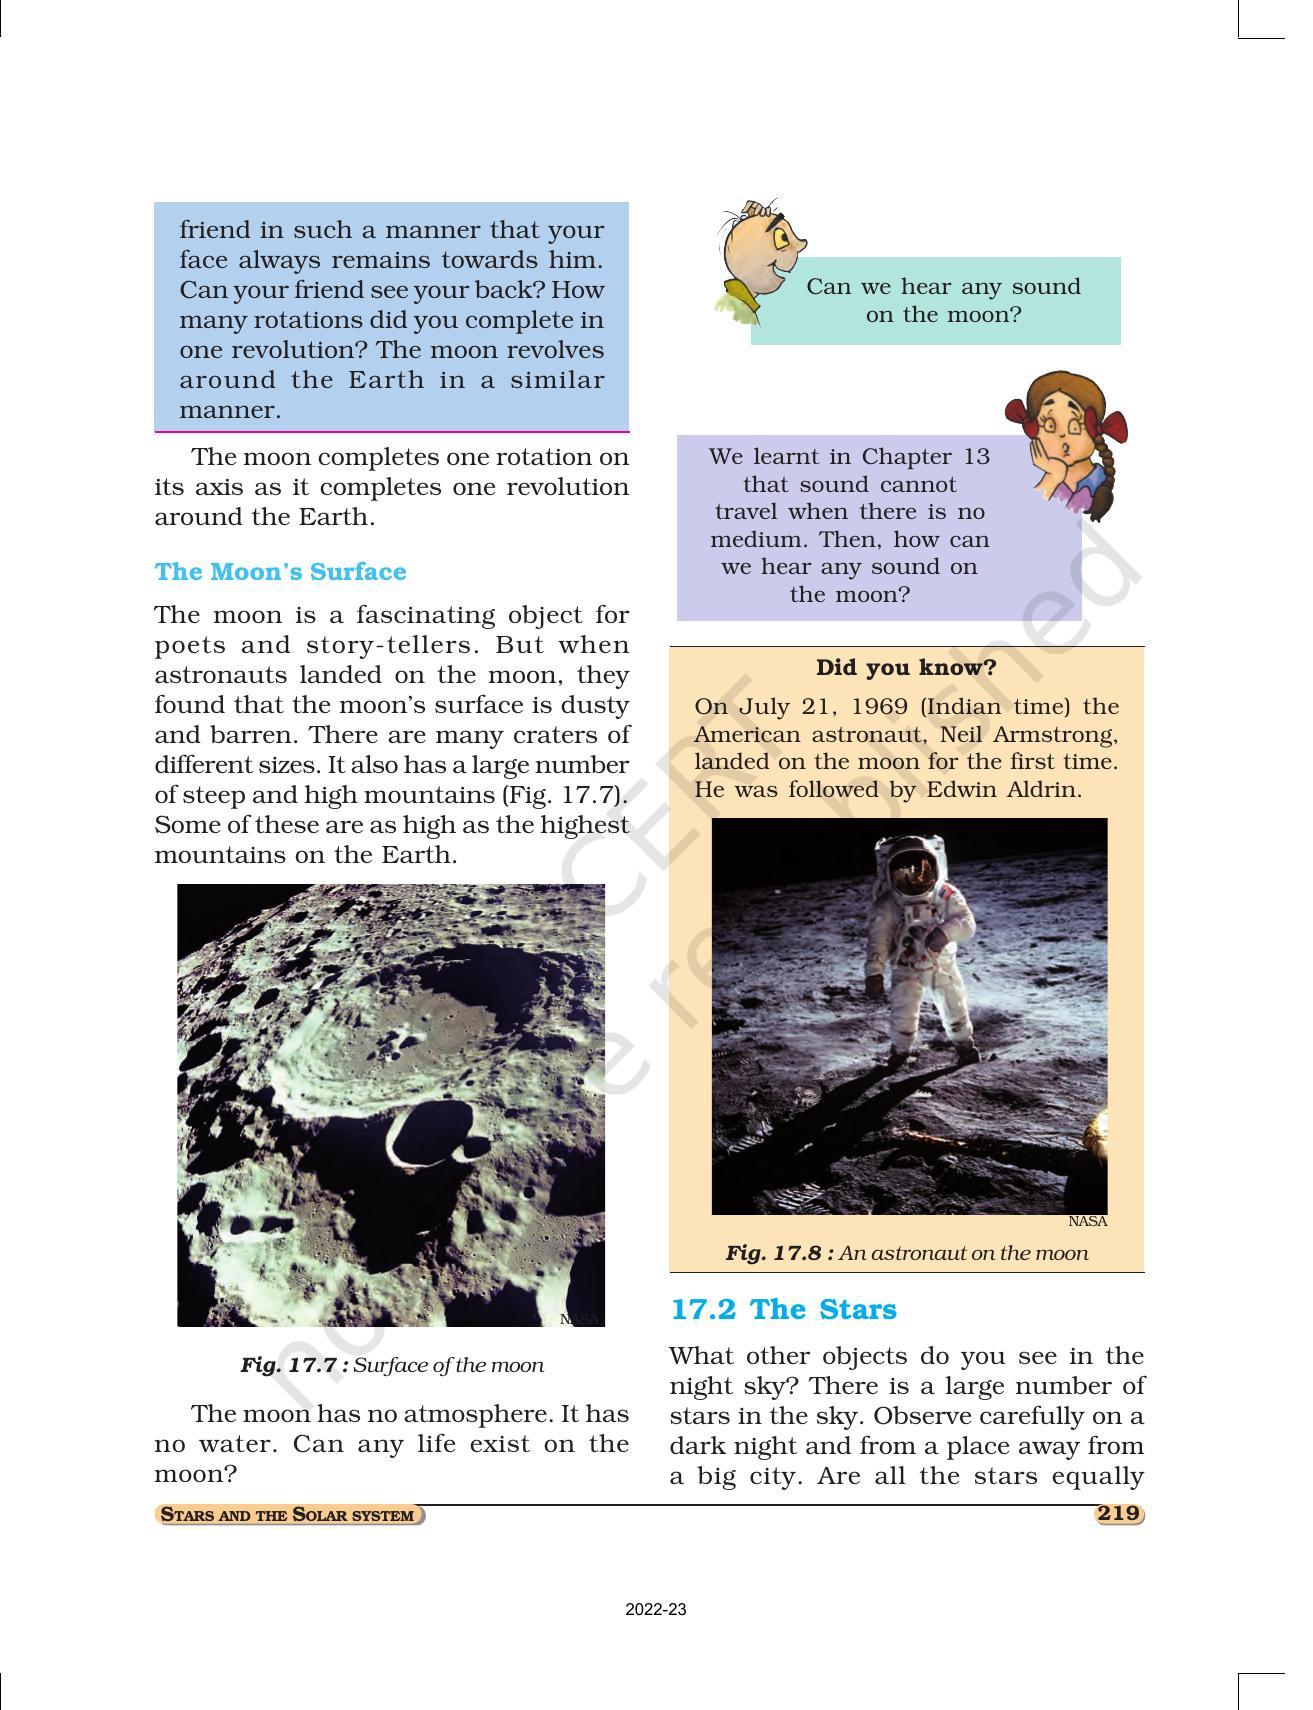 NCERT Book for Class 8 Science Chapter 17 Stars and the Solar System - Page 5